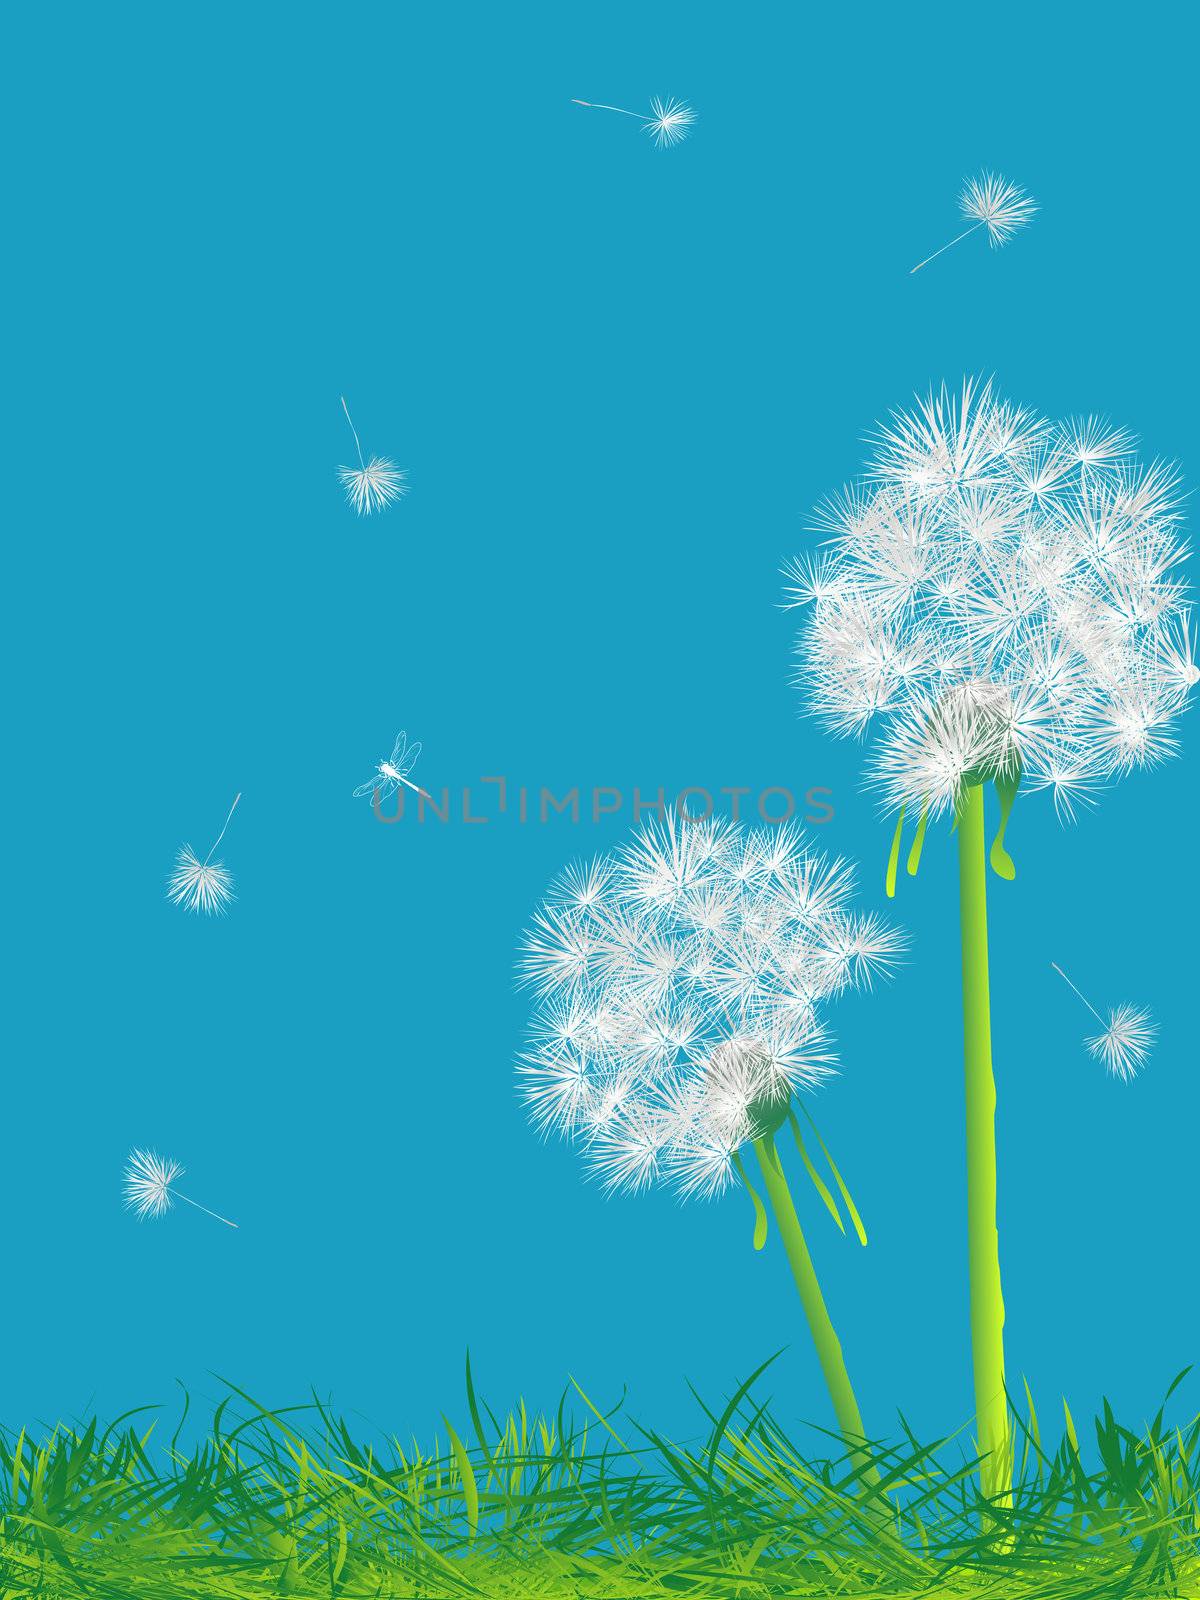 Dandelions and grass by Lirch